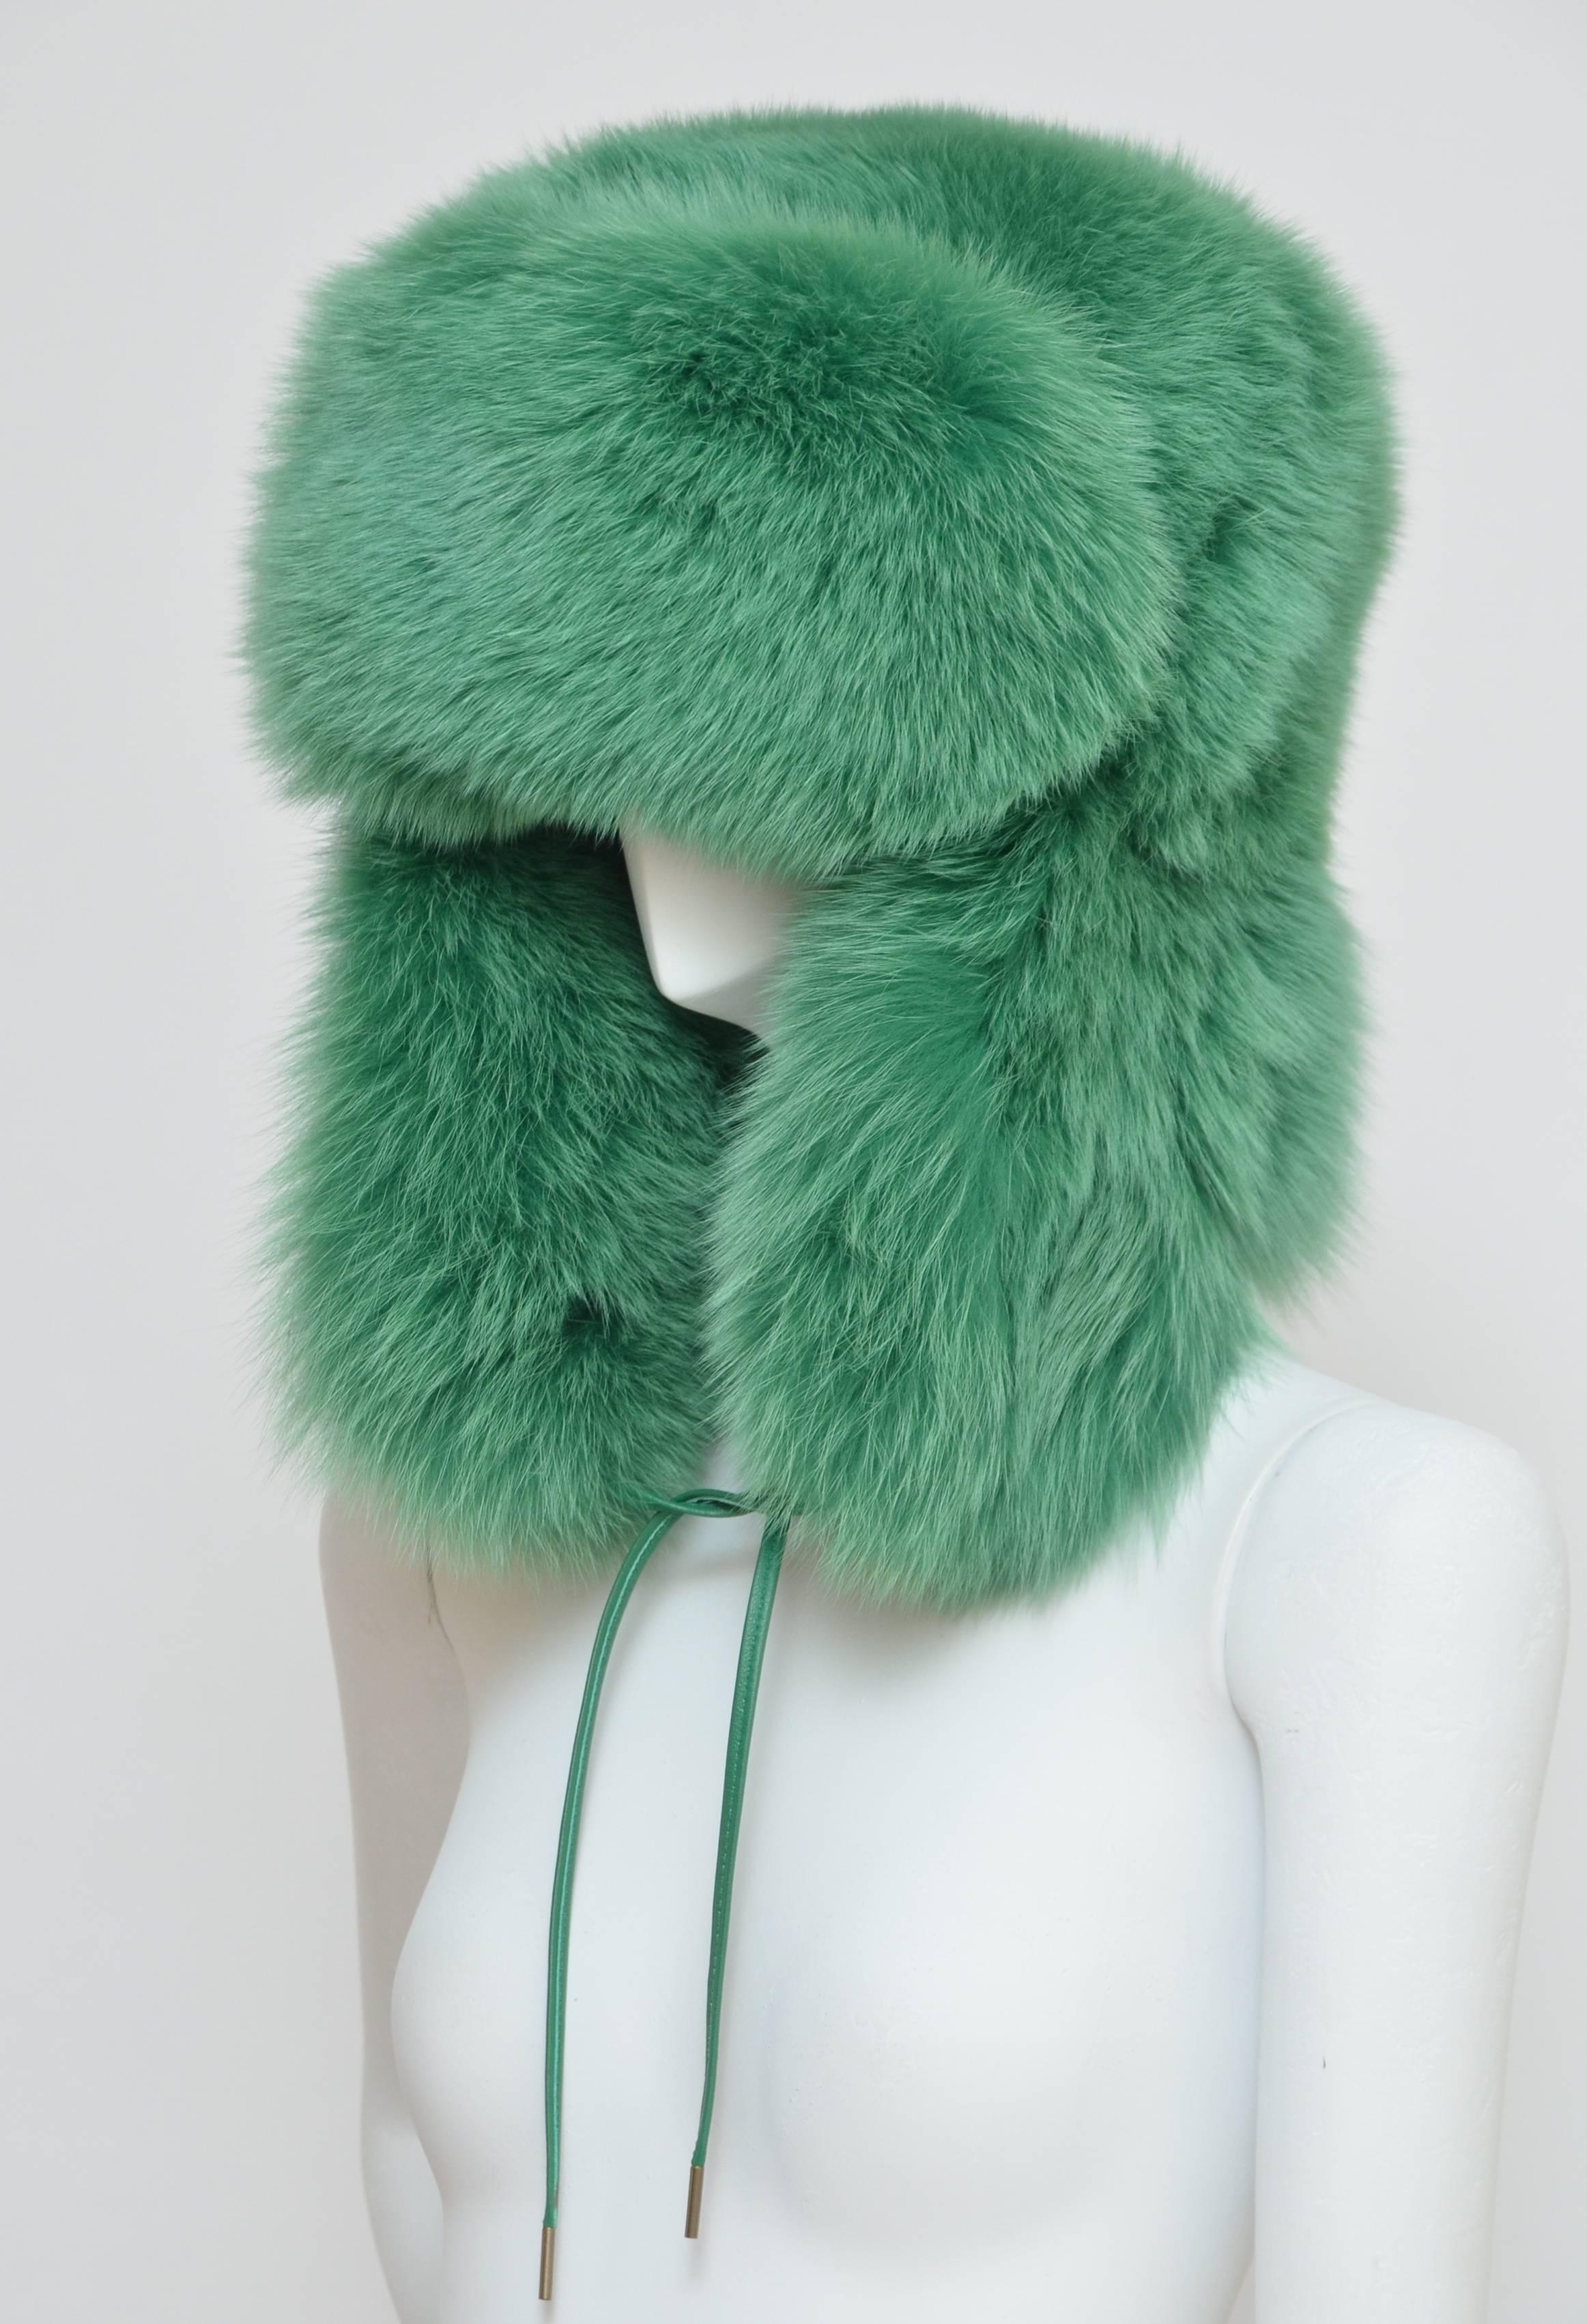 Very rare and super cool Marc Jacobs Green color  fox fur hat .
New with tags attached.Tie closure in the front.
Same hat in red  (model) was  seen  on  Lil Wayne who  wore it in his music video.
Made in USA.
FINAL SALE.